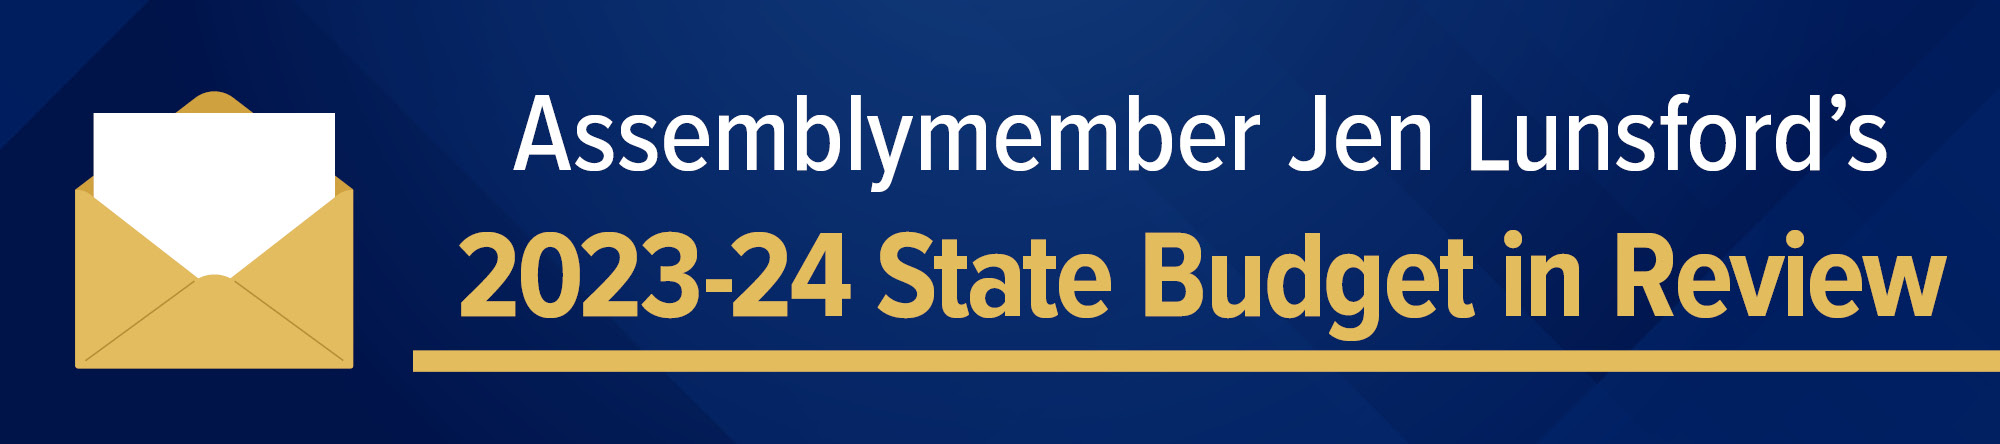 2023-24 State Budget in Review